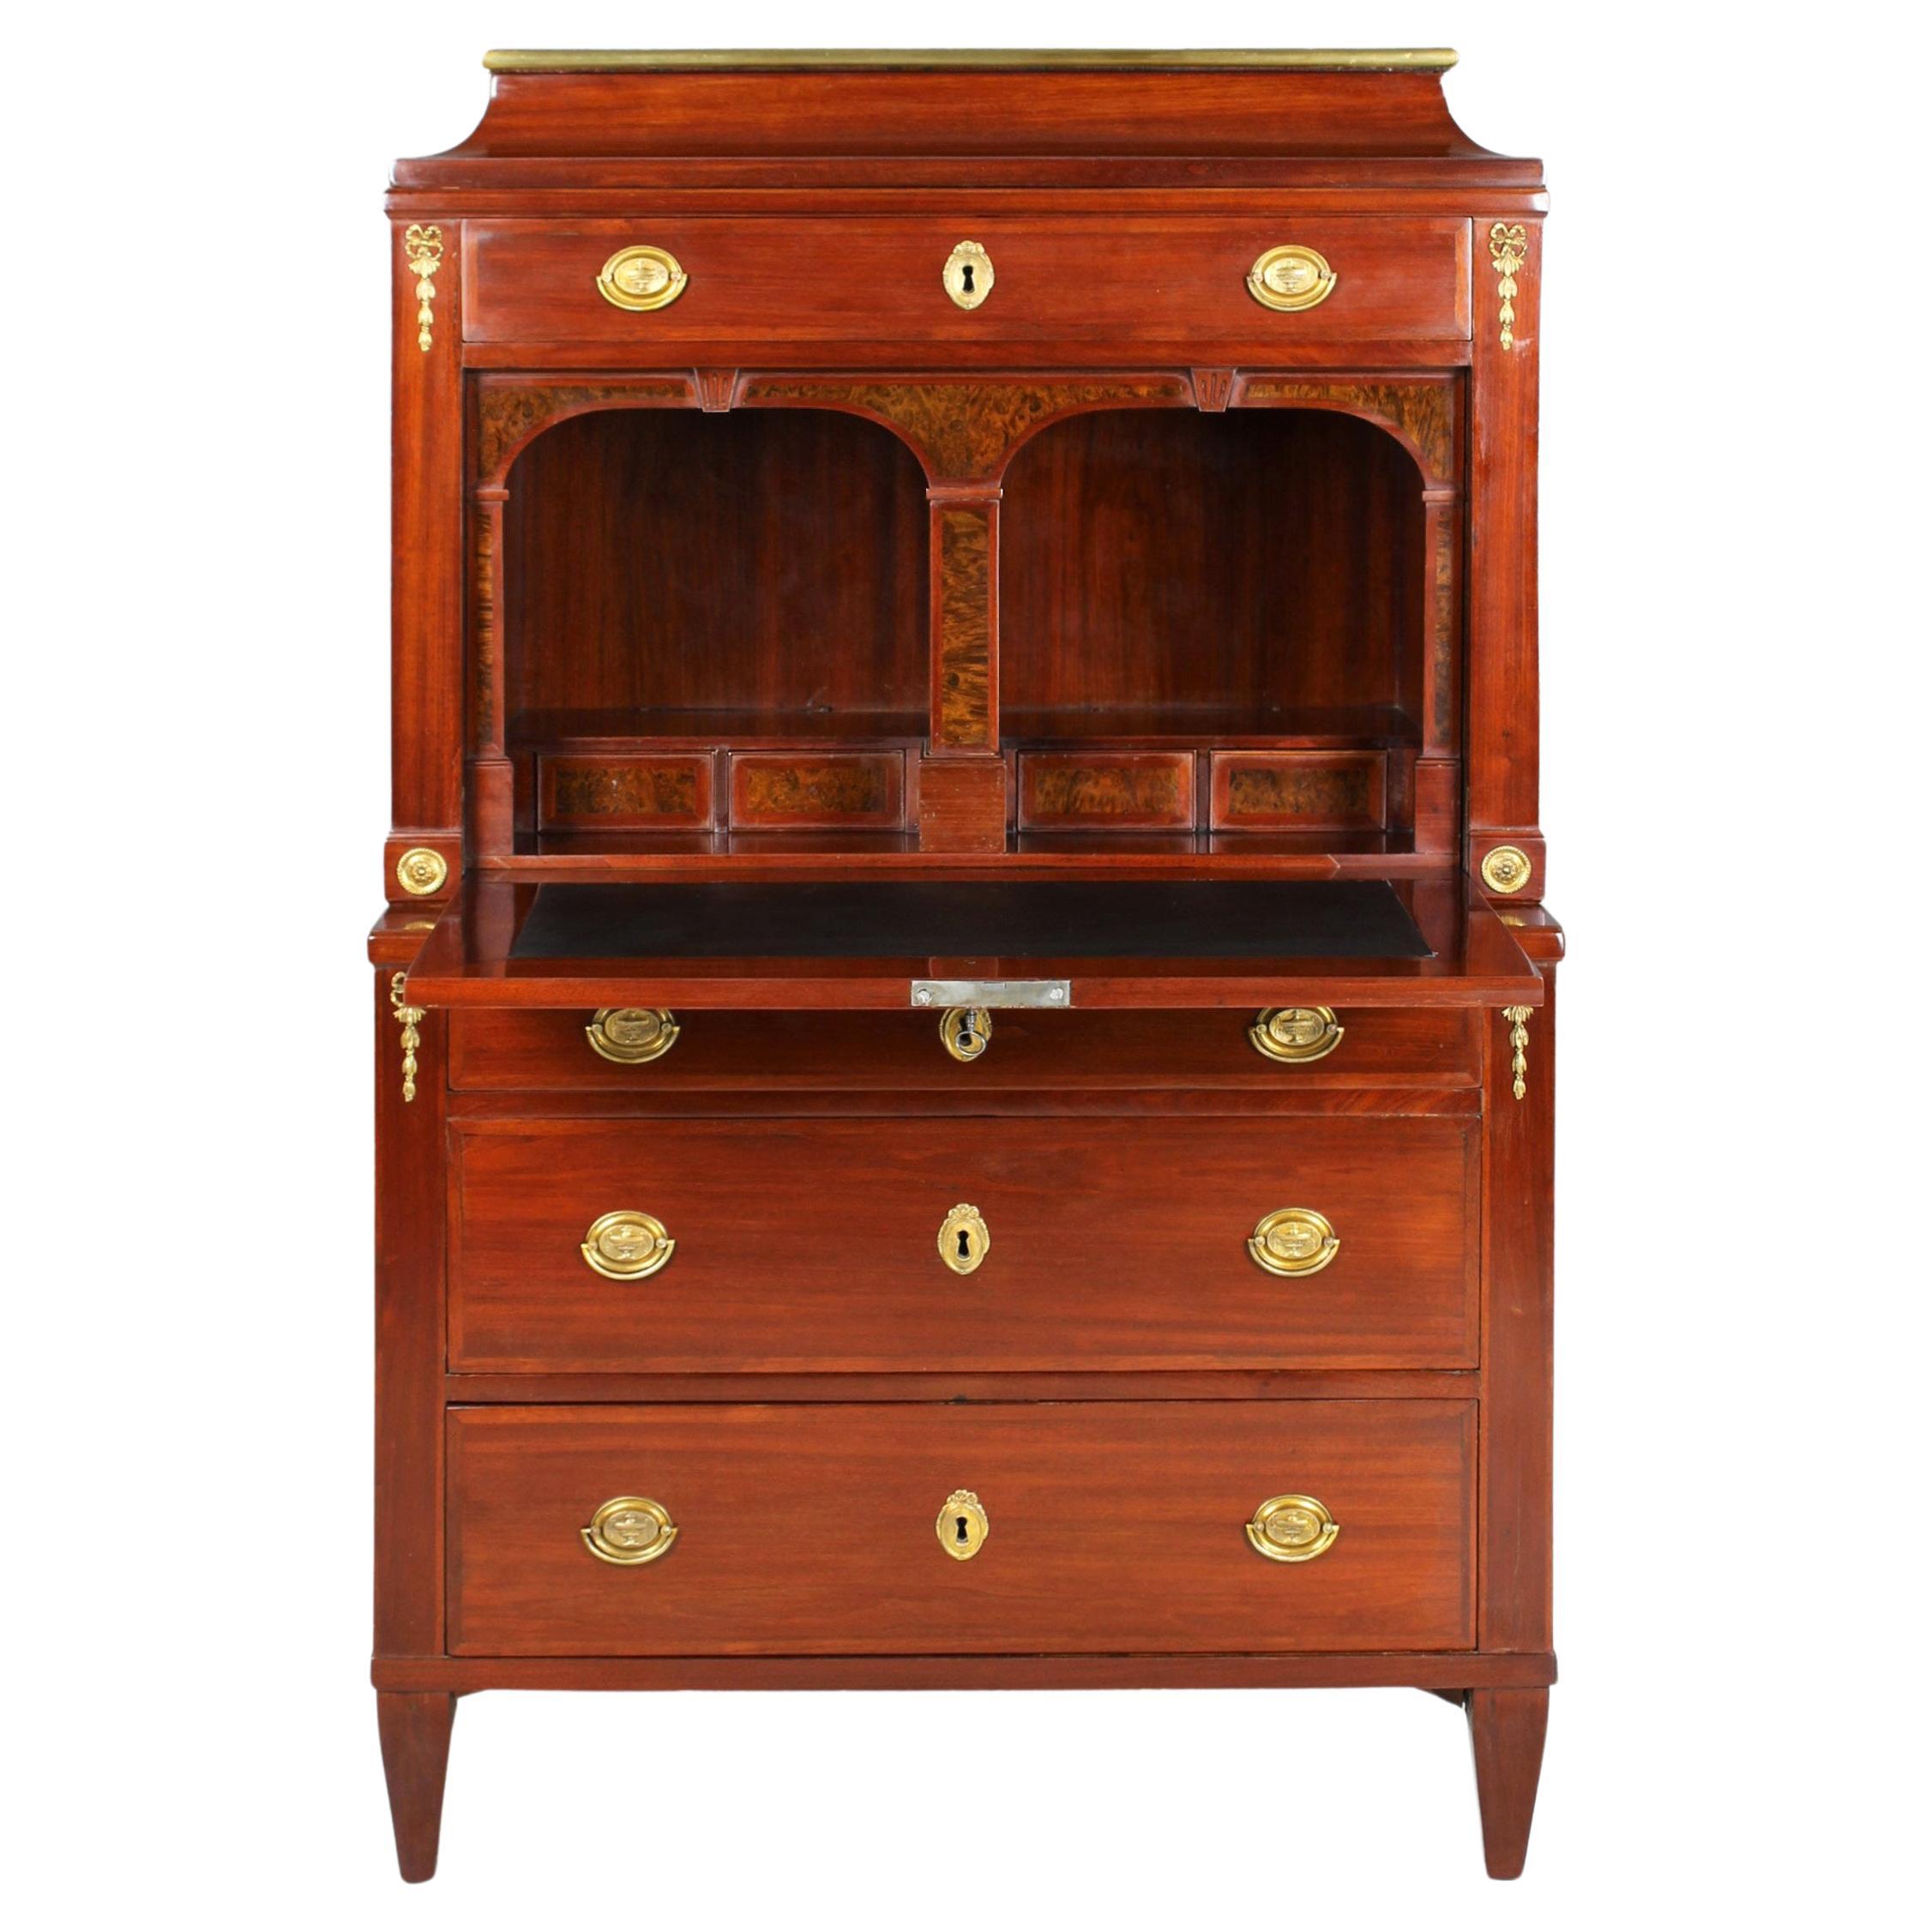 Late 18th or Early 19th Century Secretary with Hidden Mechanisms, Mahogany For Sale